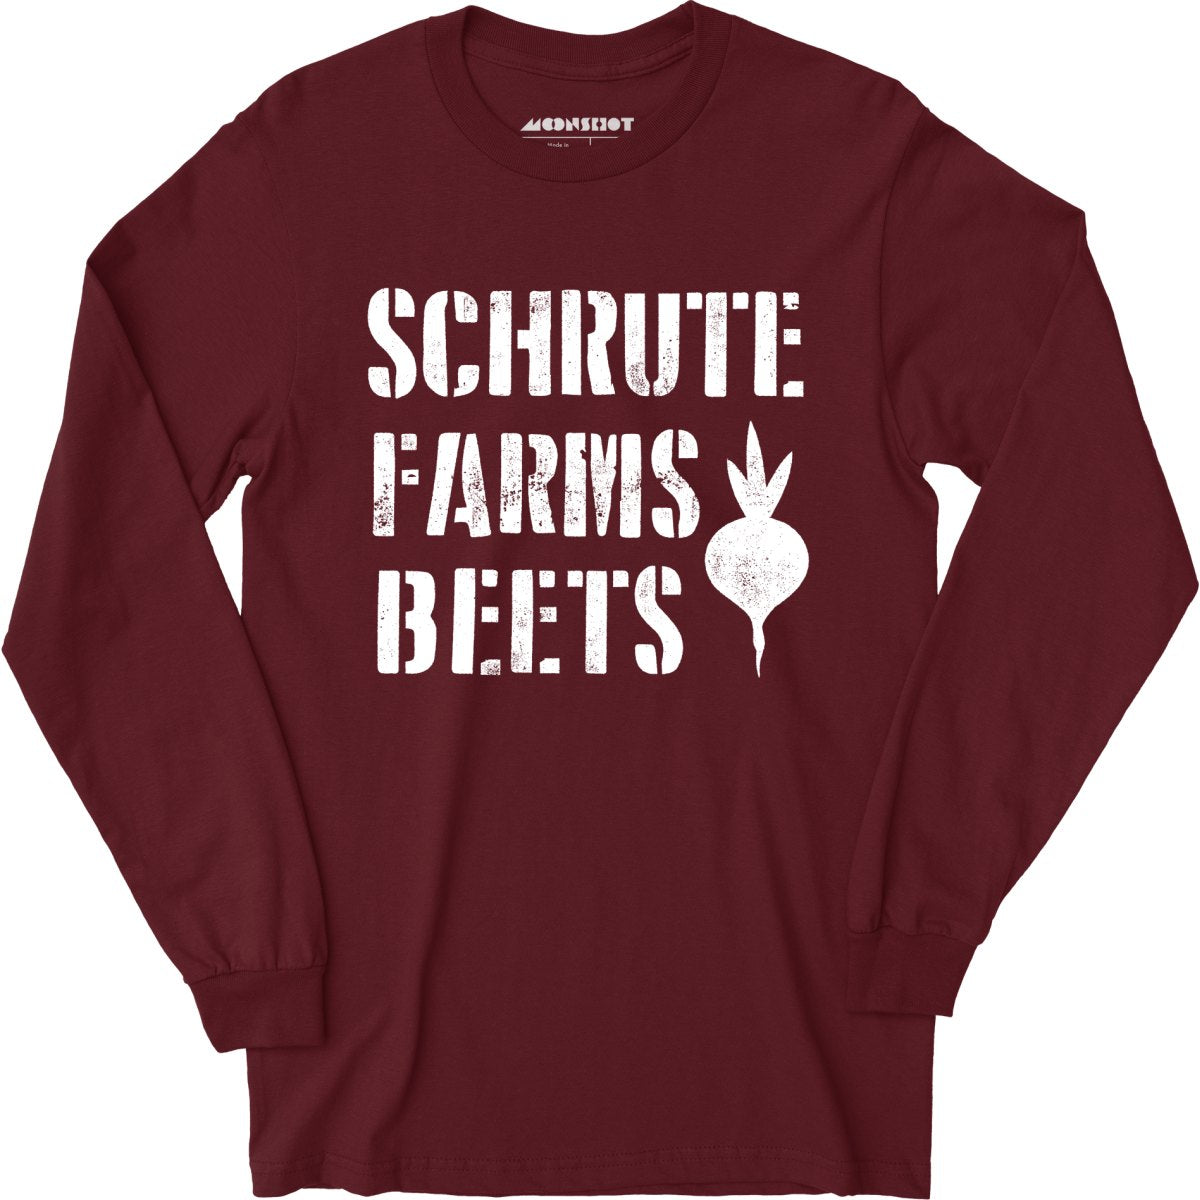 Schrute Farms Beets - Long Sleeve T-Shirt